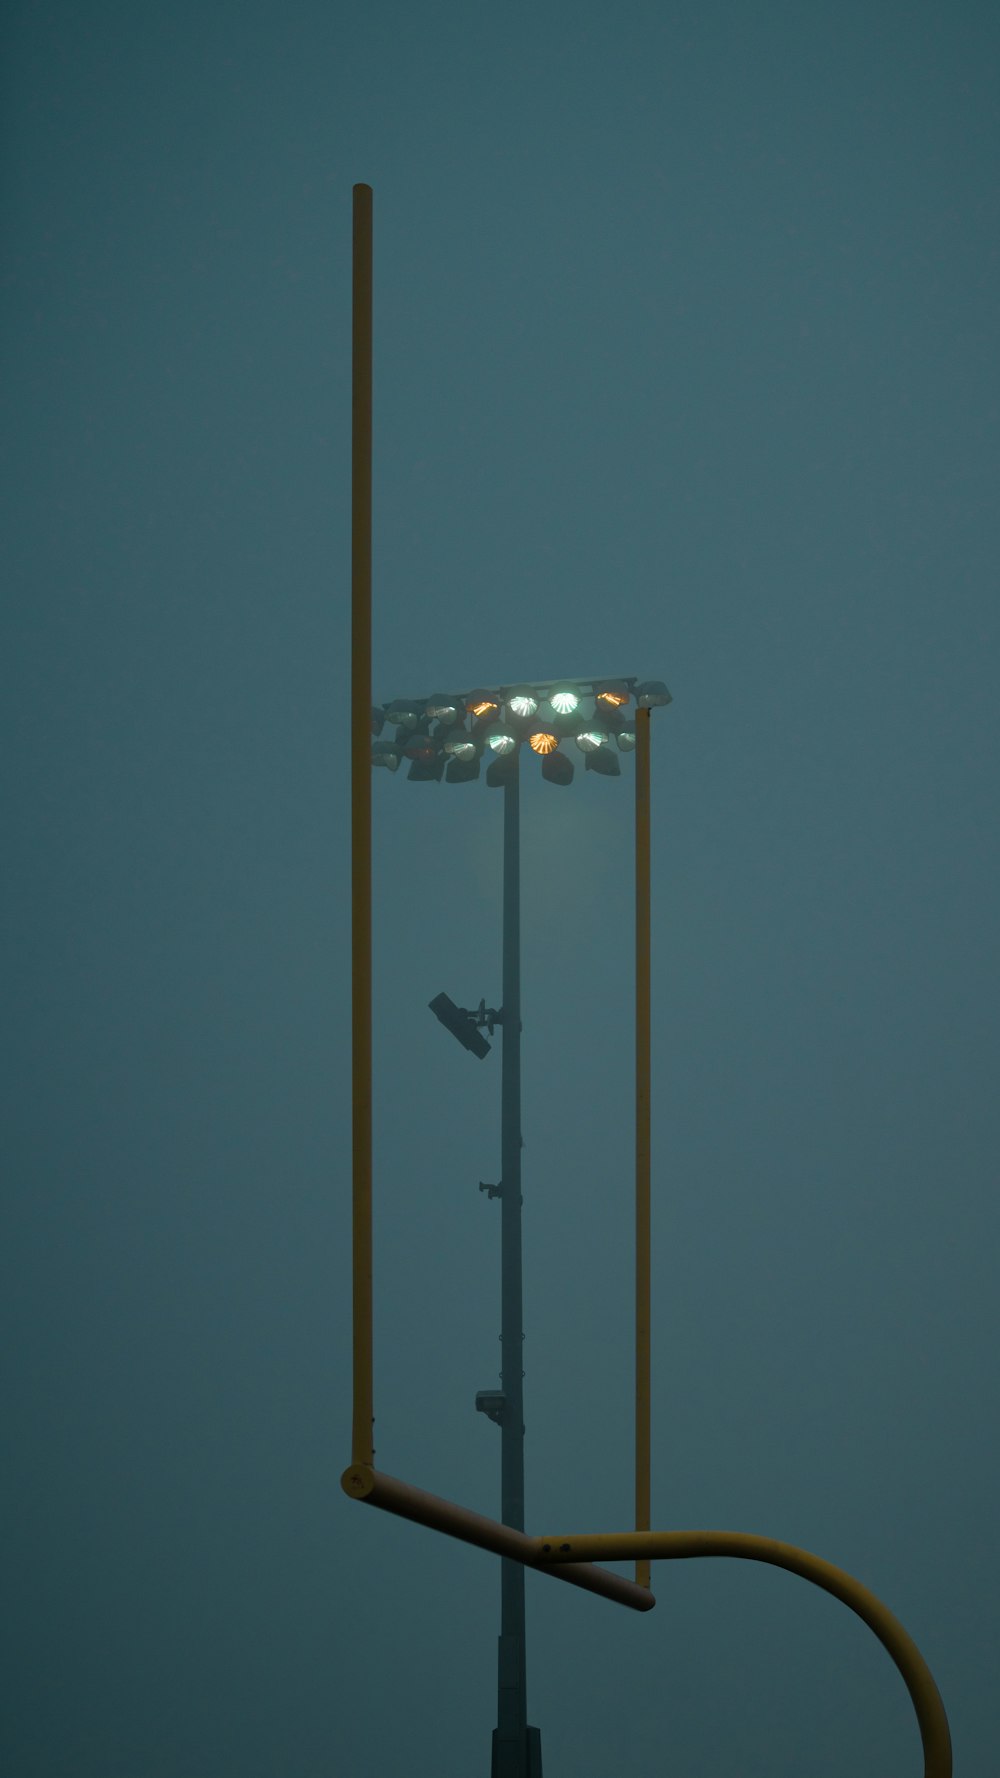 a tall light pole with a street light on top of it